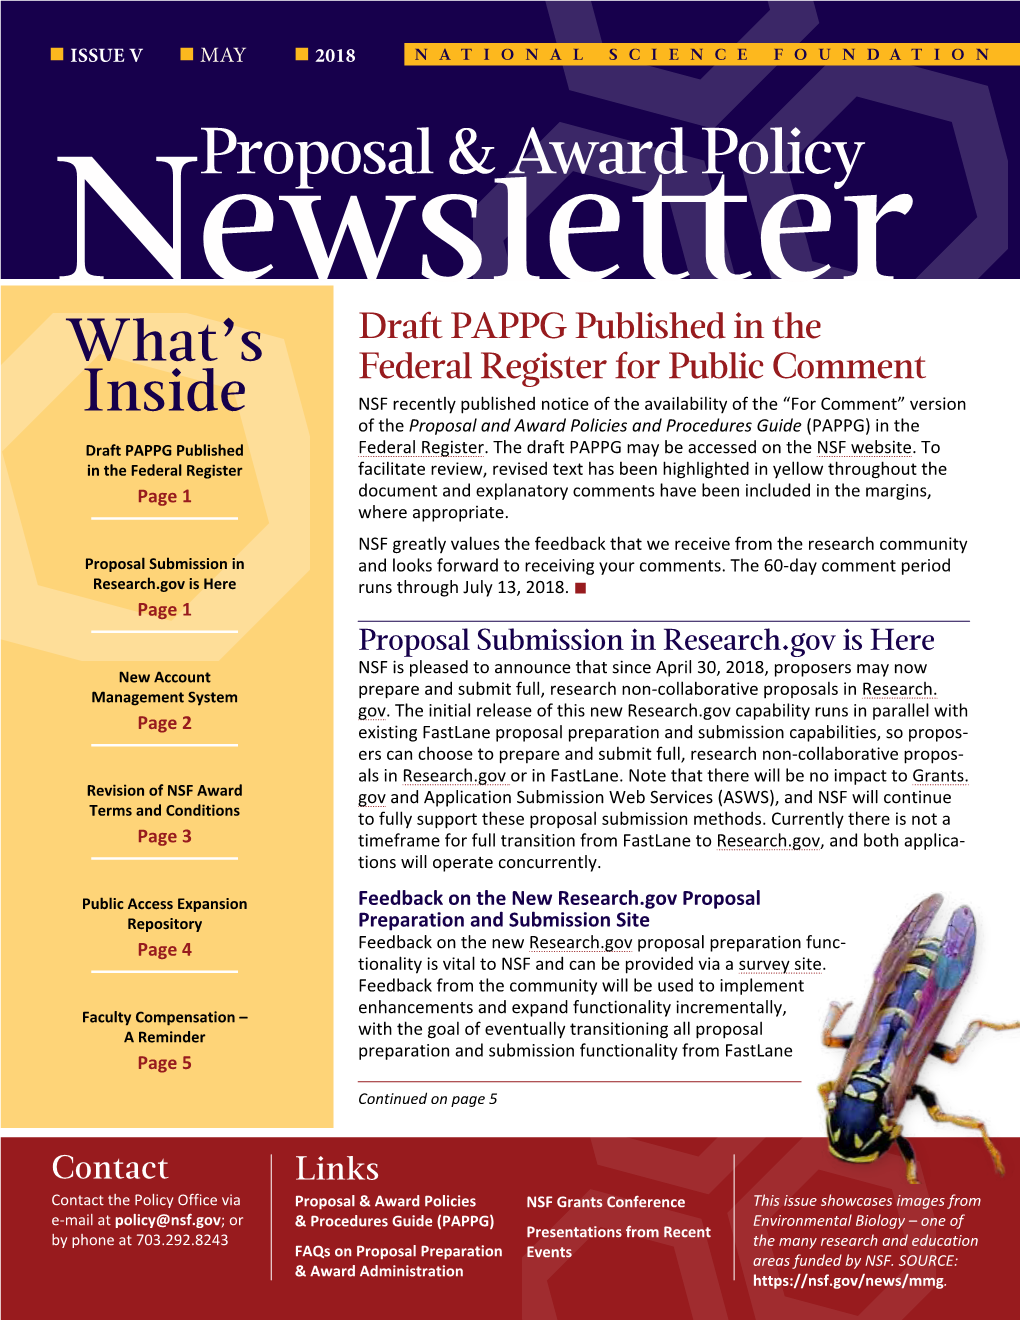 NSF Proposal and Award Policy Newsletter, Issue V, May 2018 (Nsf18078)